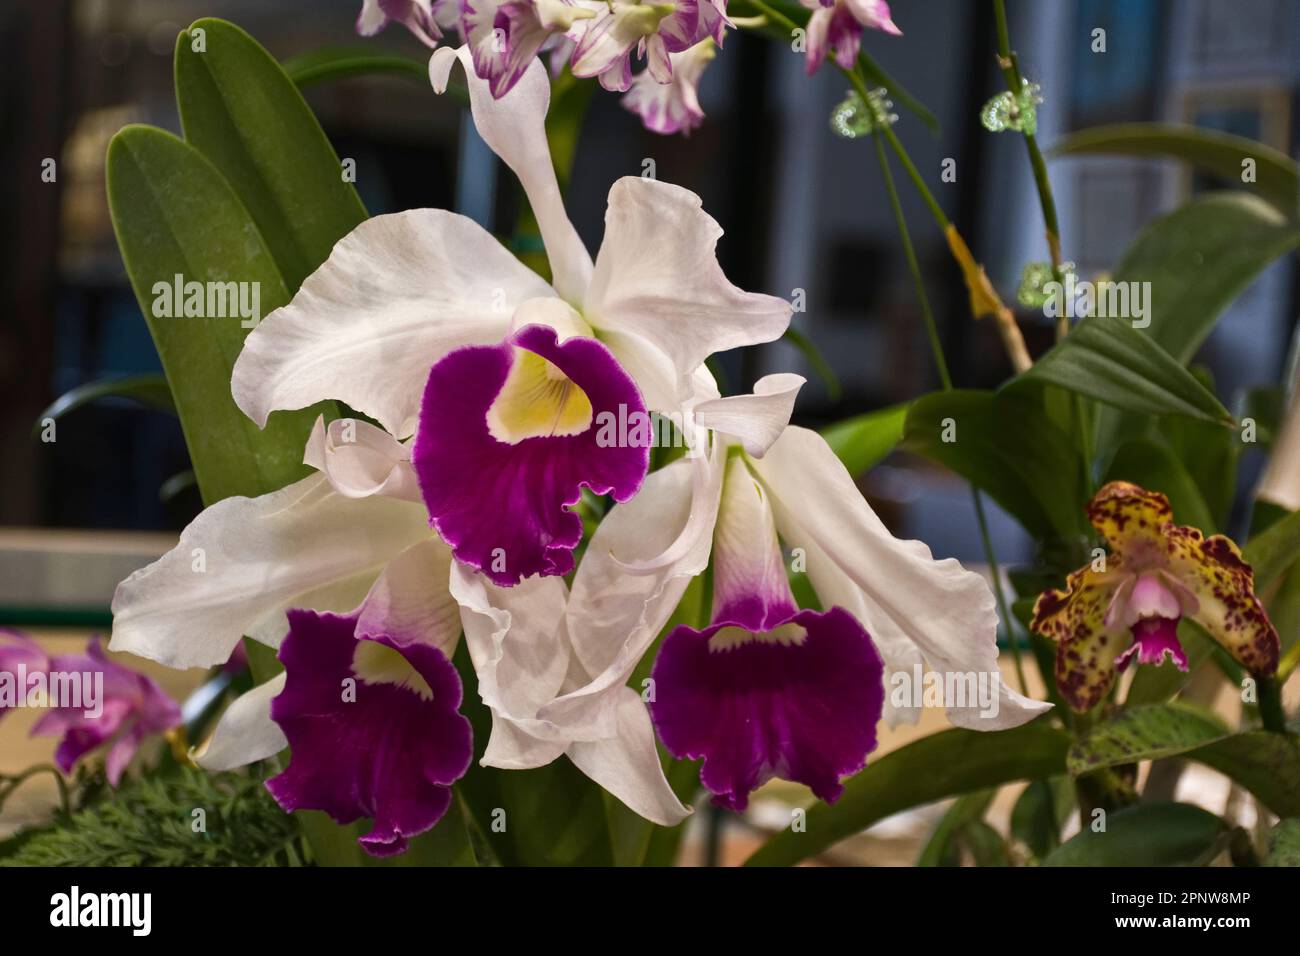 Bright and elegant mulitcolored phalaenopsis orchids in white, burgundy and yellow petals in geen leaves Stock Photo